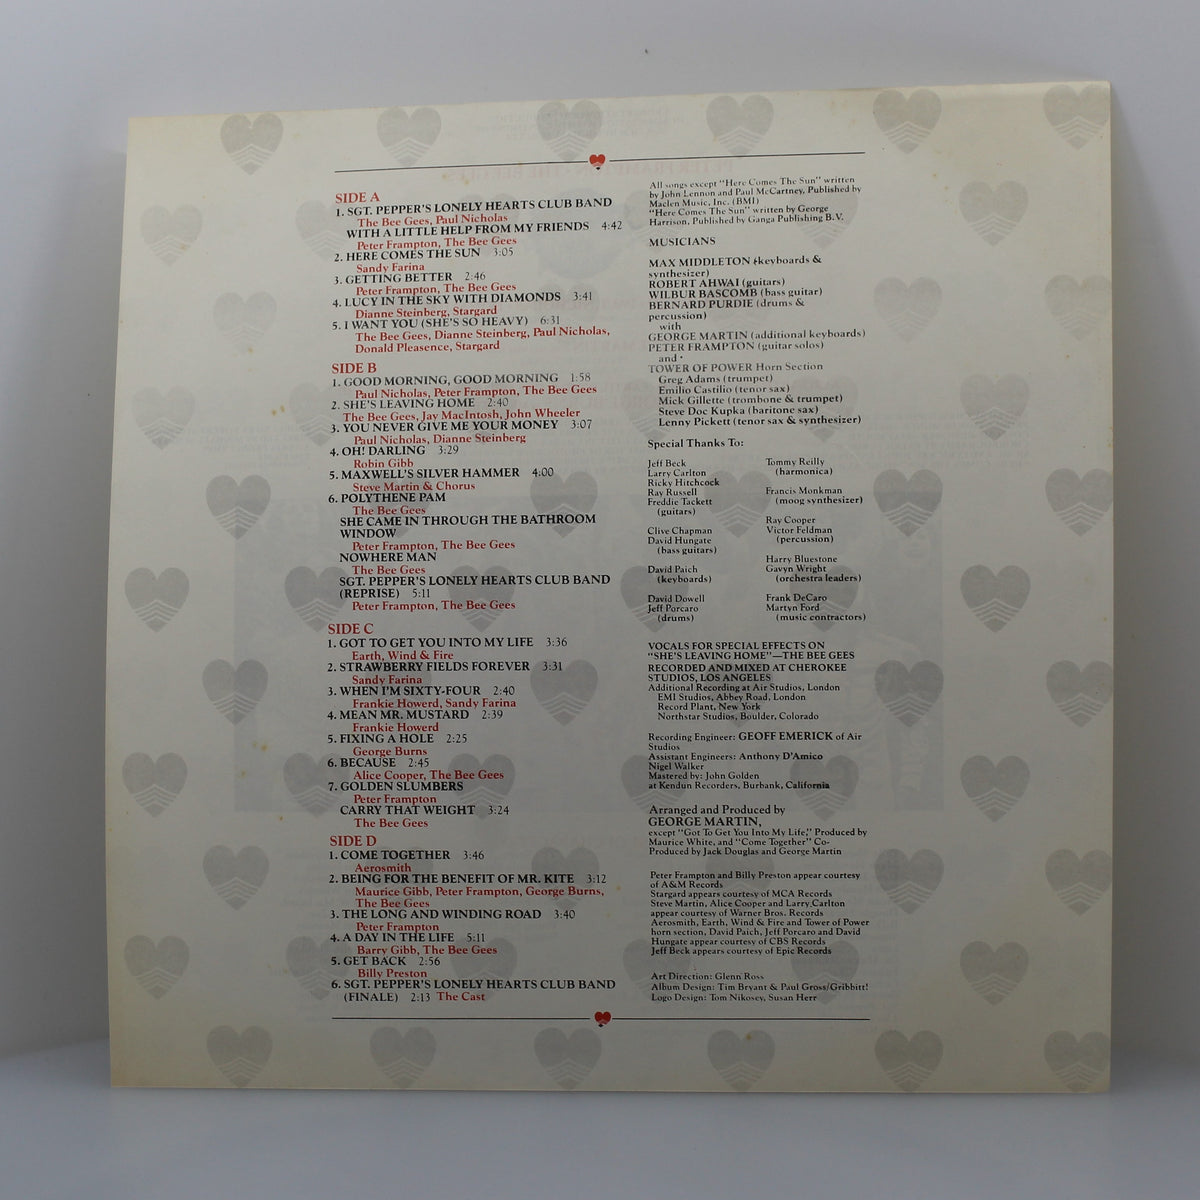 Bee Gees - Sgt. Pepper&#39;s Lonely Hearts Club Band, 2 x Vinyl, LP 33Rpm, Album, Stereo, Singapore, Malaysia &amp; Hong Kong 1978